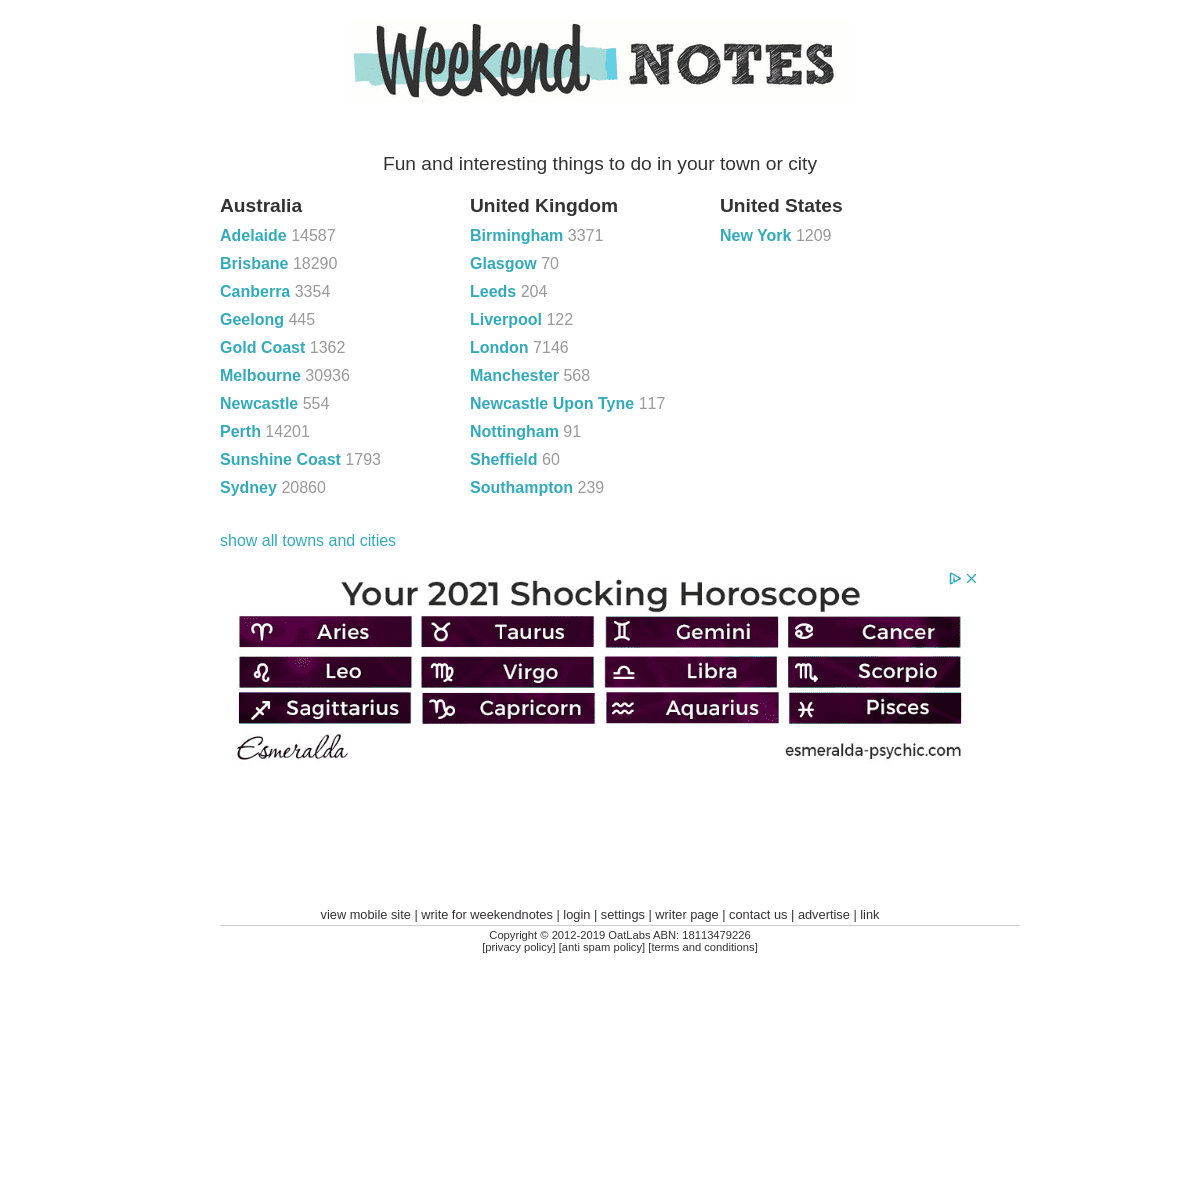 A complete backup of https://weekendnotes.com